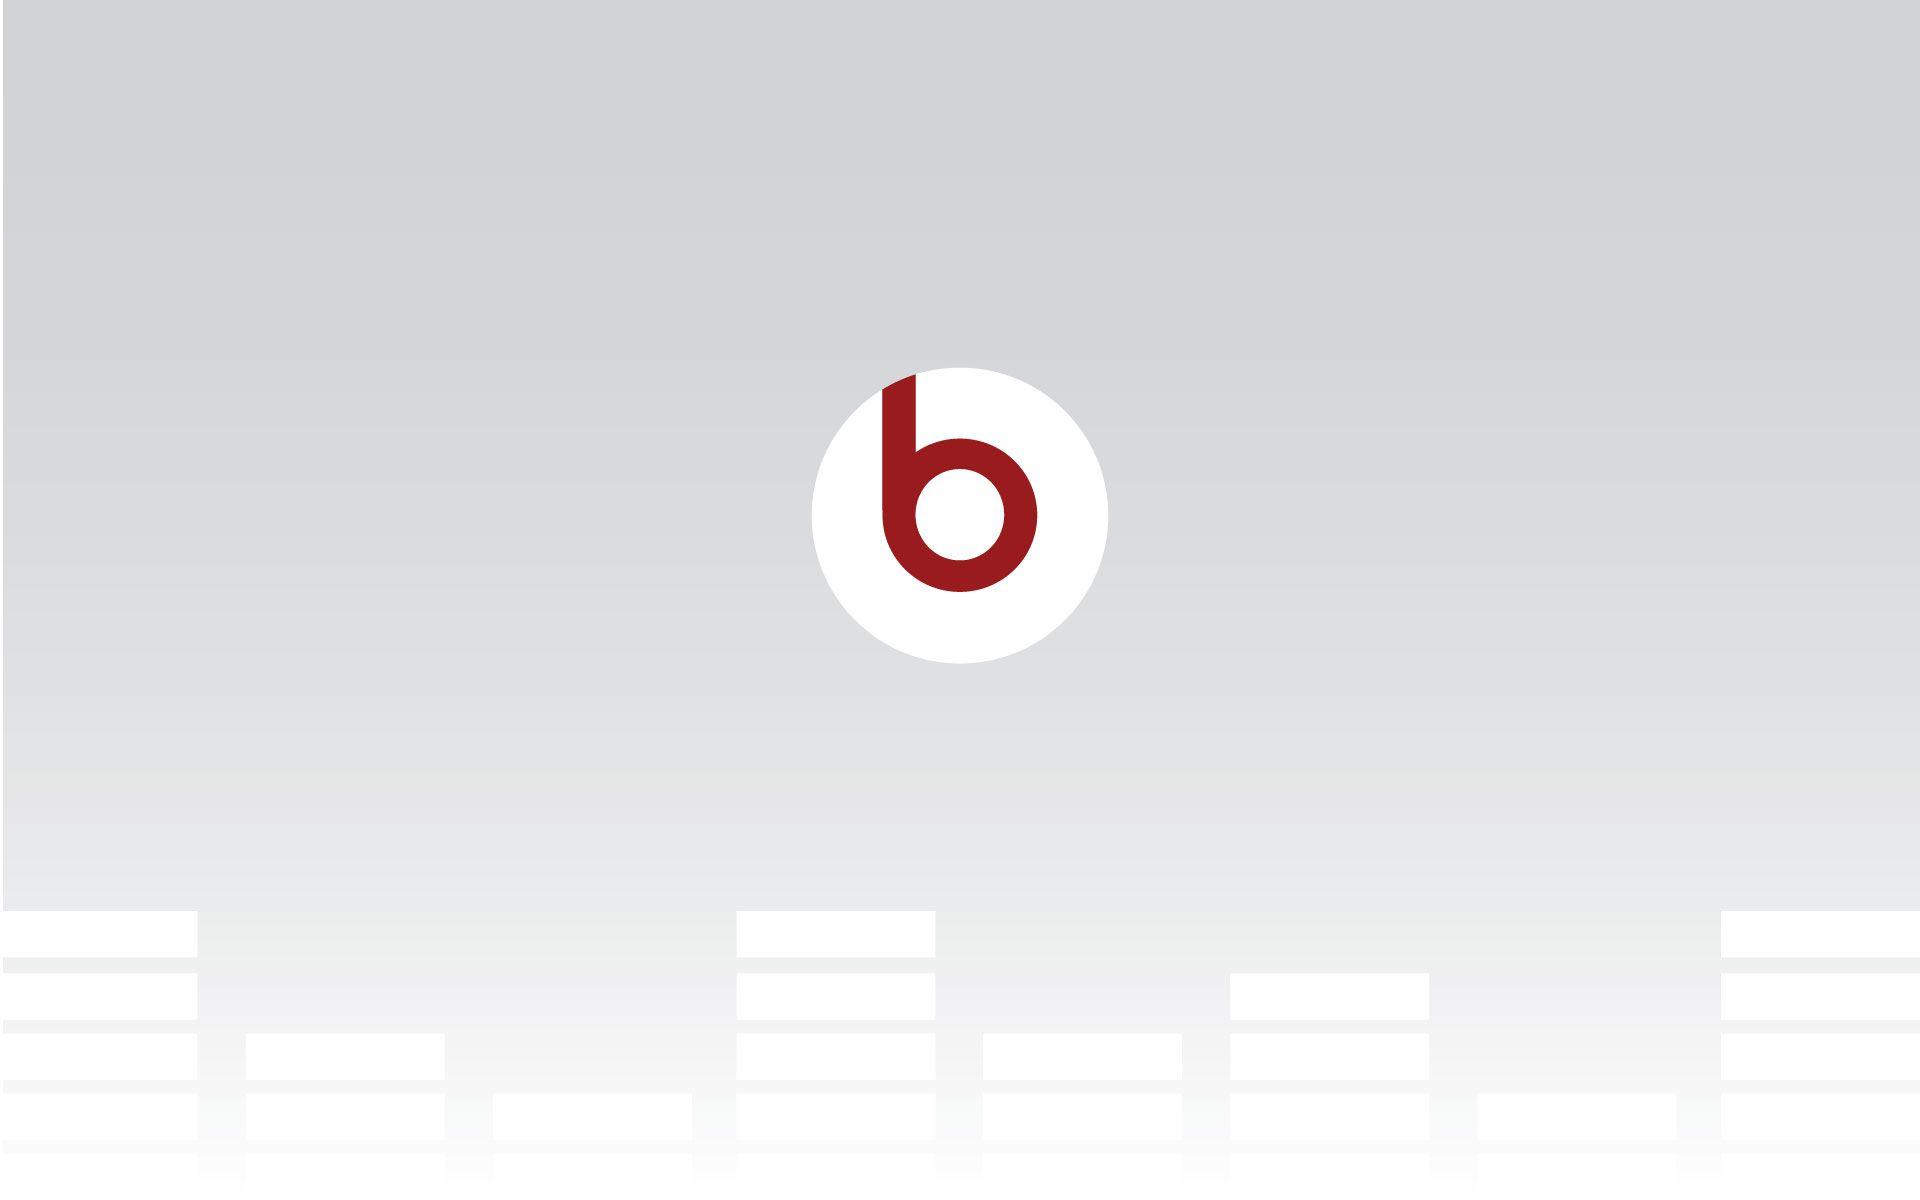 Beats by Dre Wallpapers : Desktop and mobile wallpapers : Wallippo